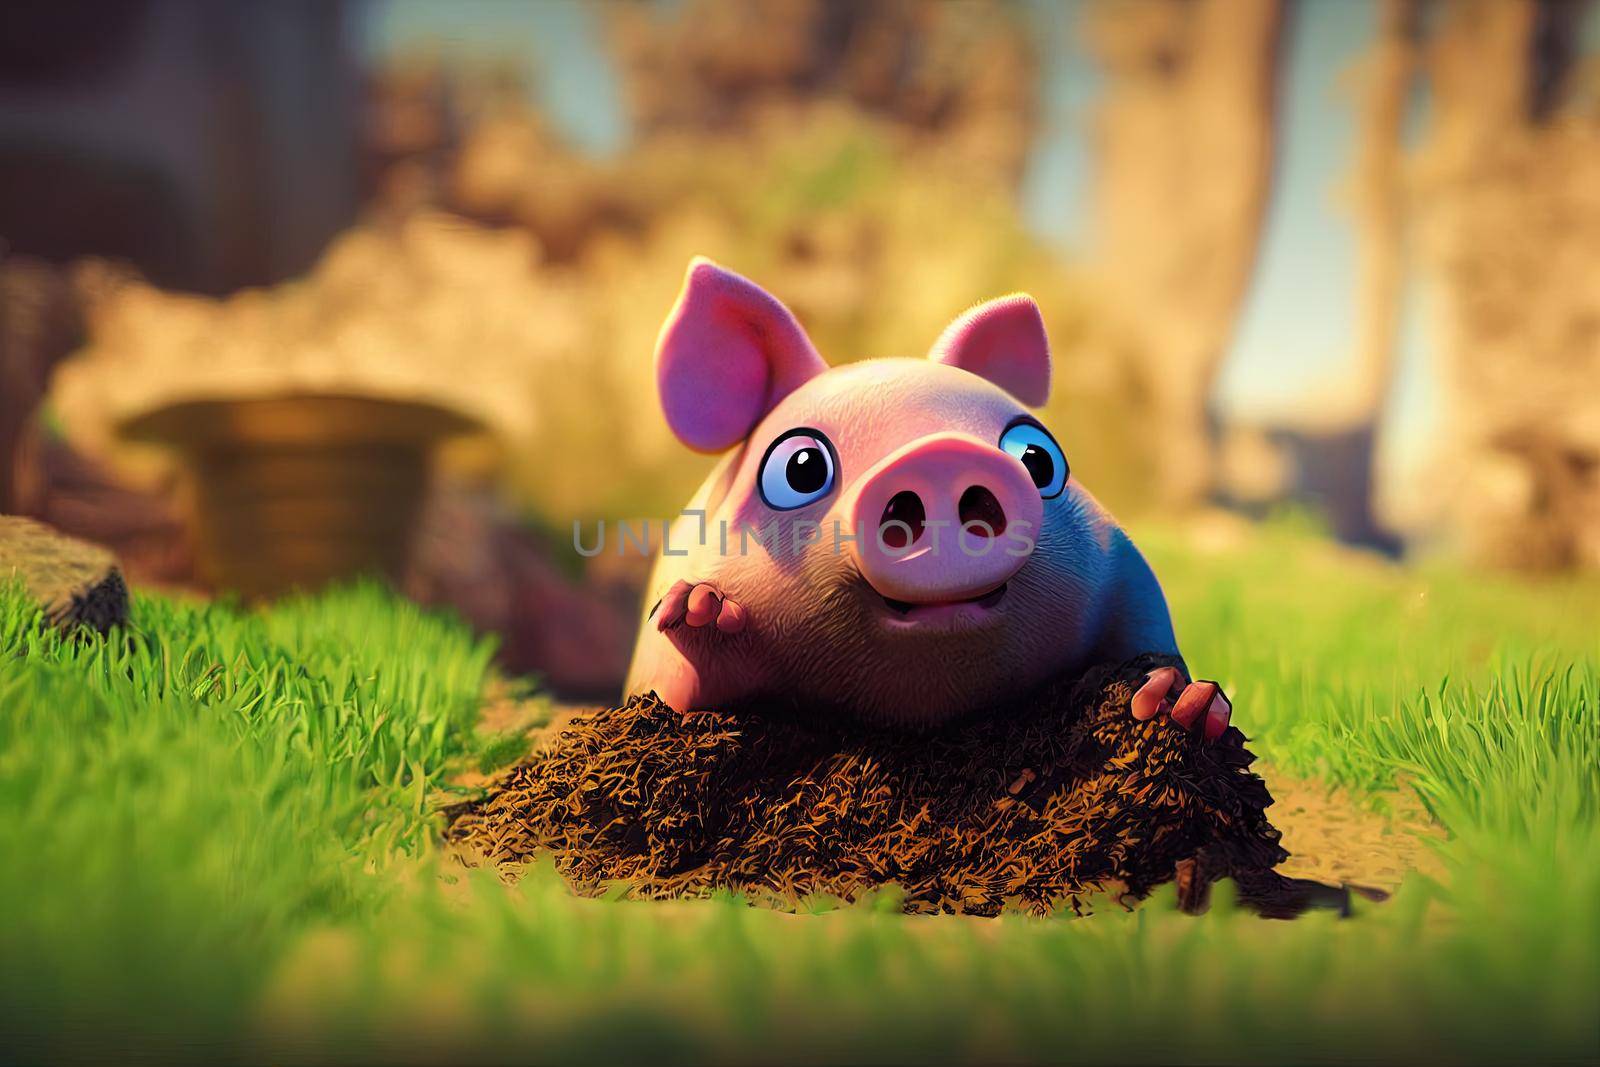 cute and adorable pig playing in dirt. High quality 3d illustration